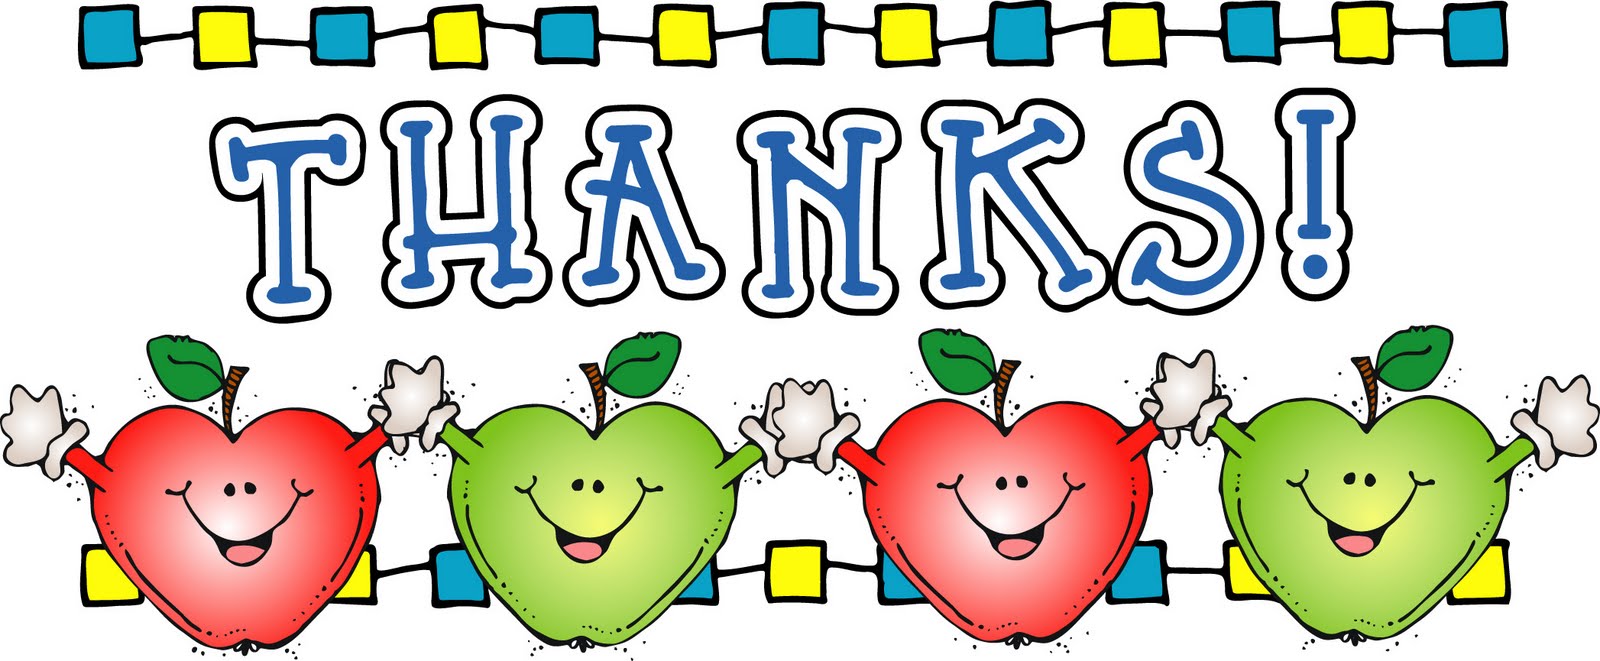 thank you clipart funny - photo #20